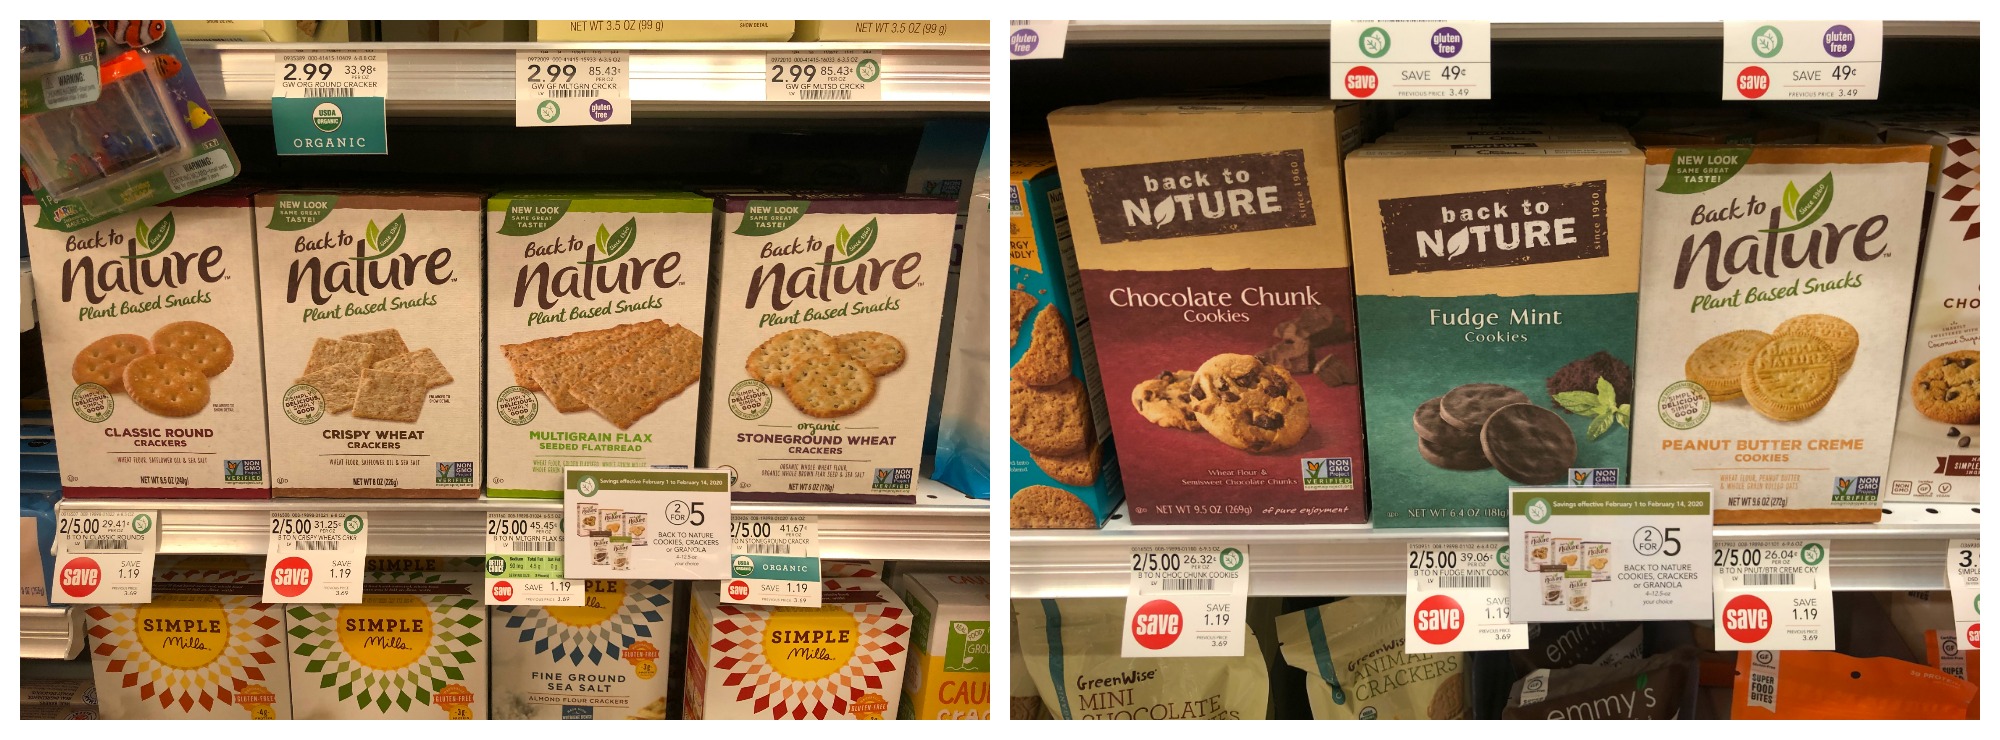 Stock Up On Back To Nature™ Plant-Based Cookies & Crackers - On Sale NOW At Publix on I Heart Publix 1